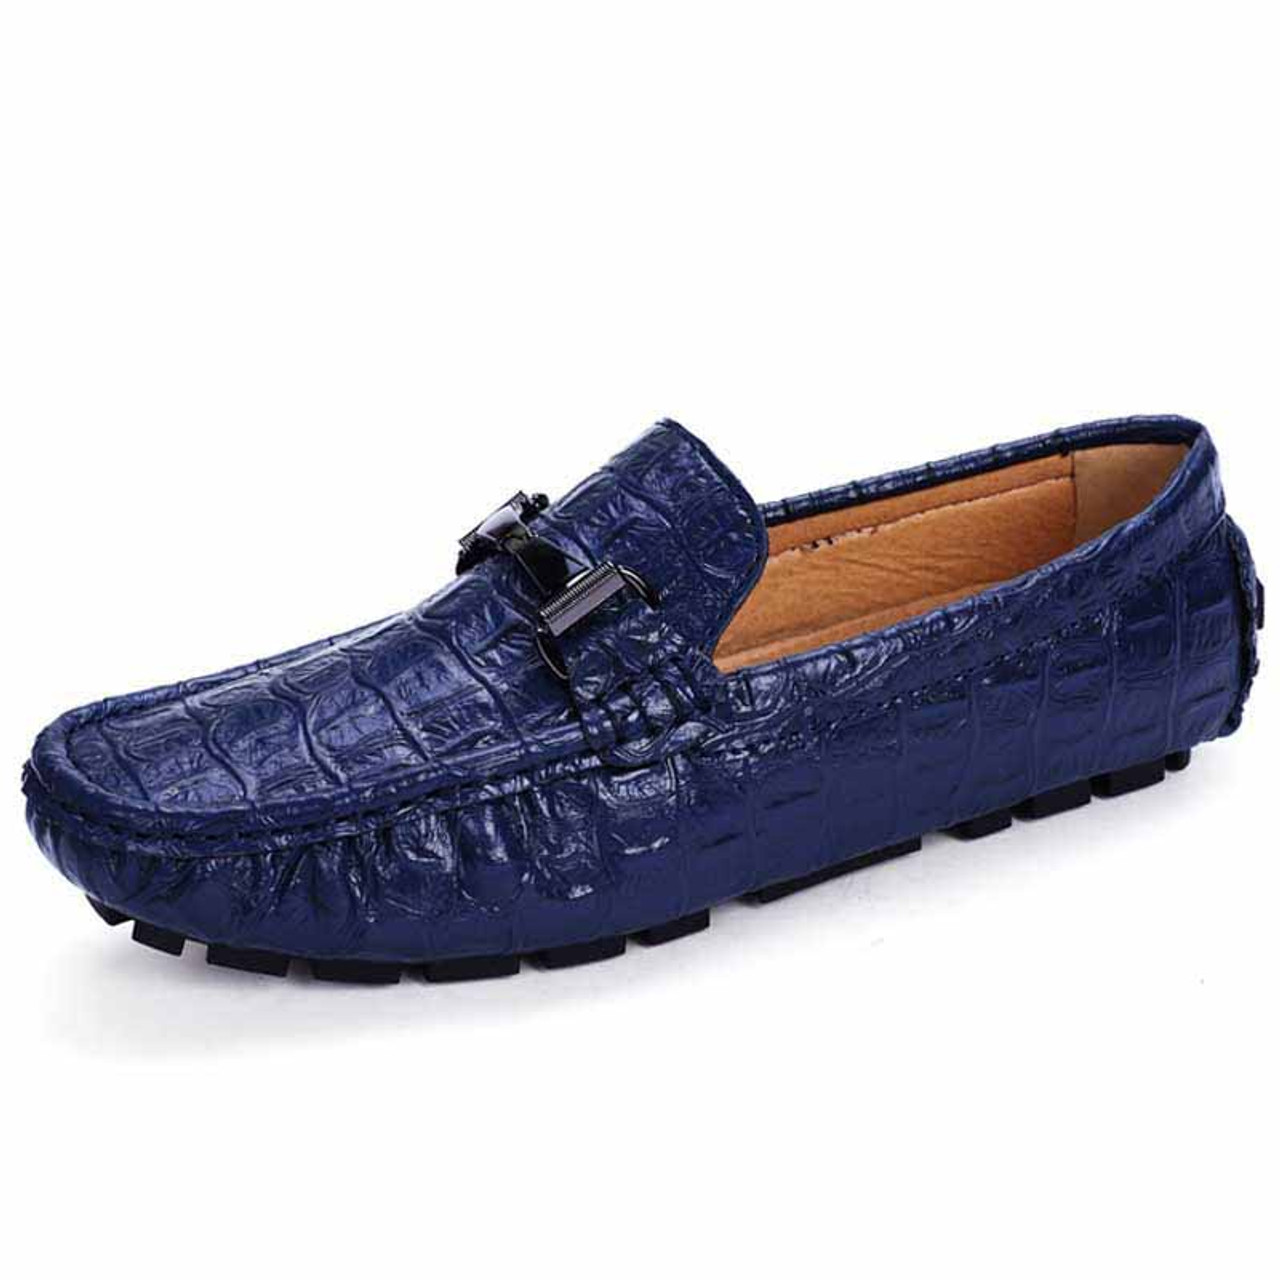 Luxury shoes for men - Tod's loafers in blue leather crocodile effect